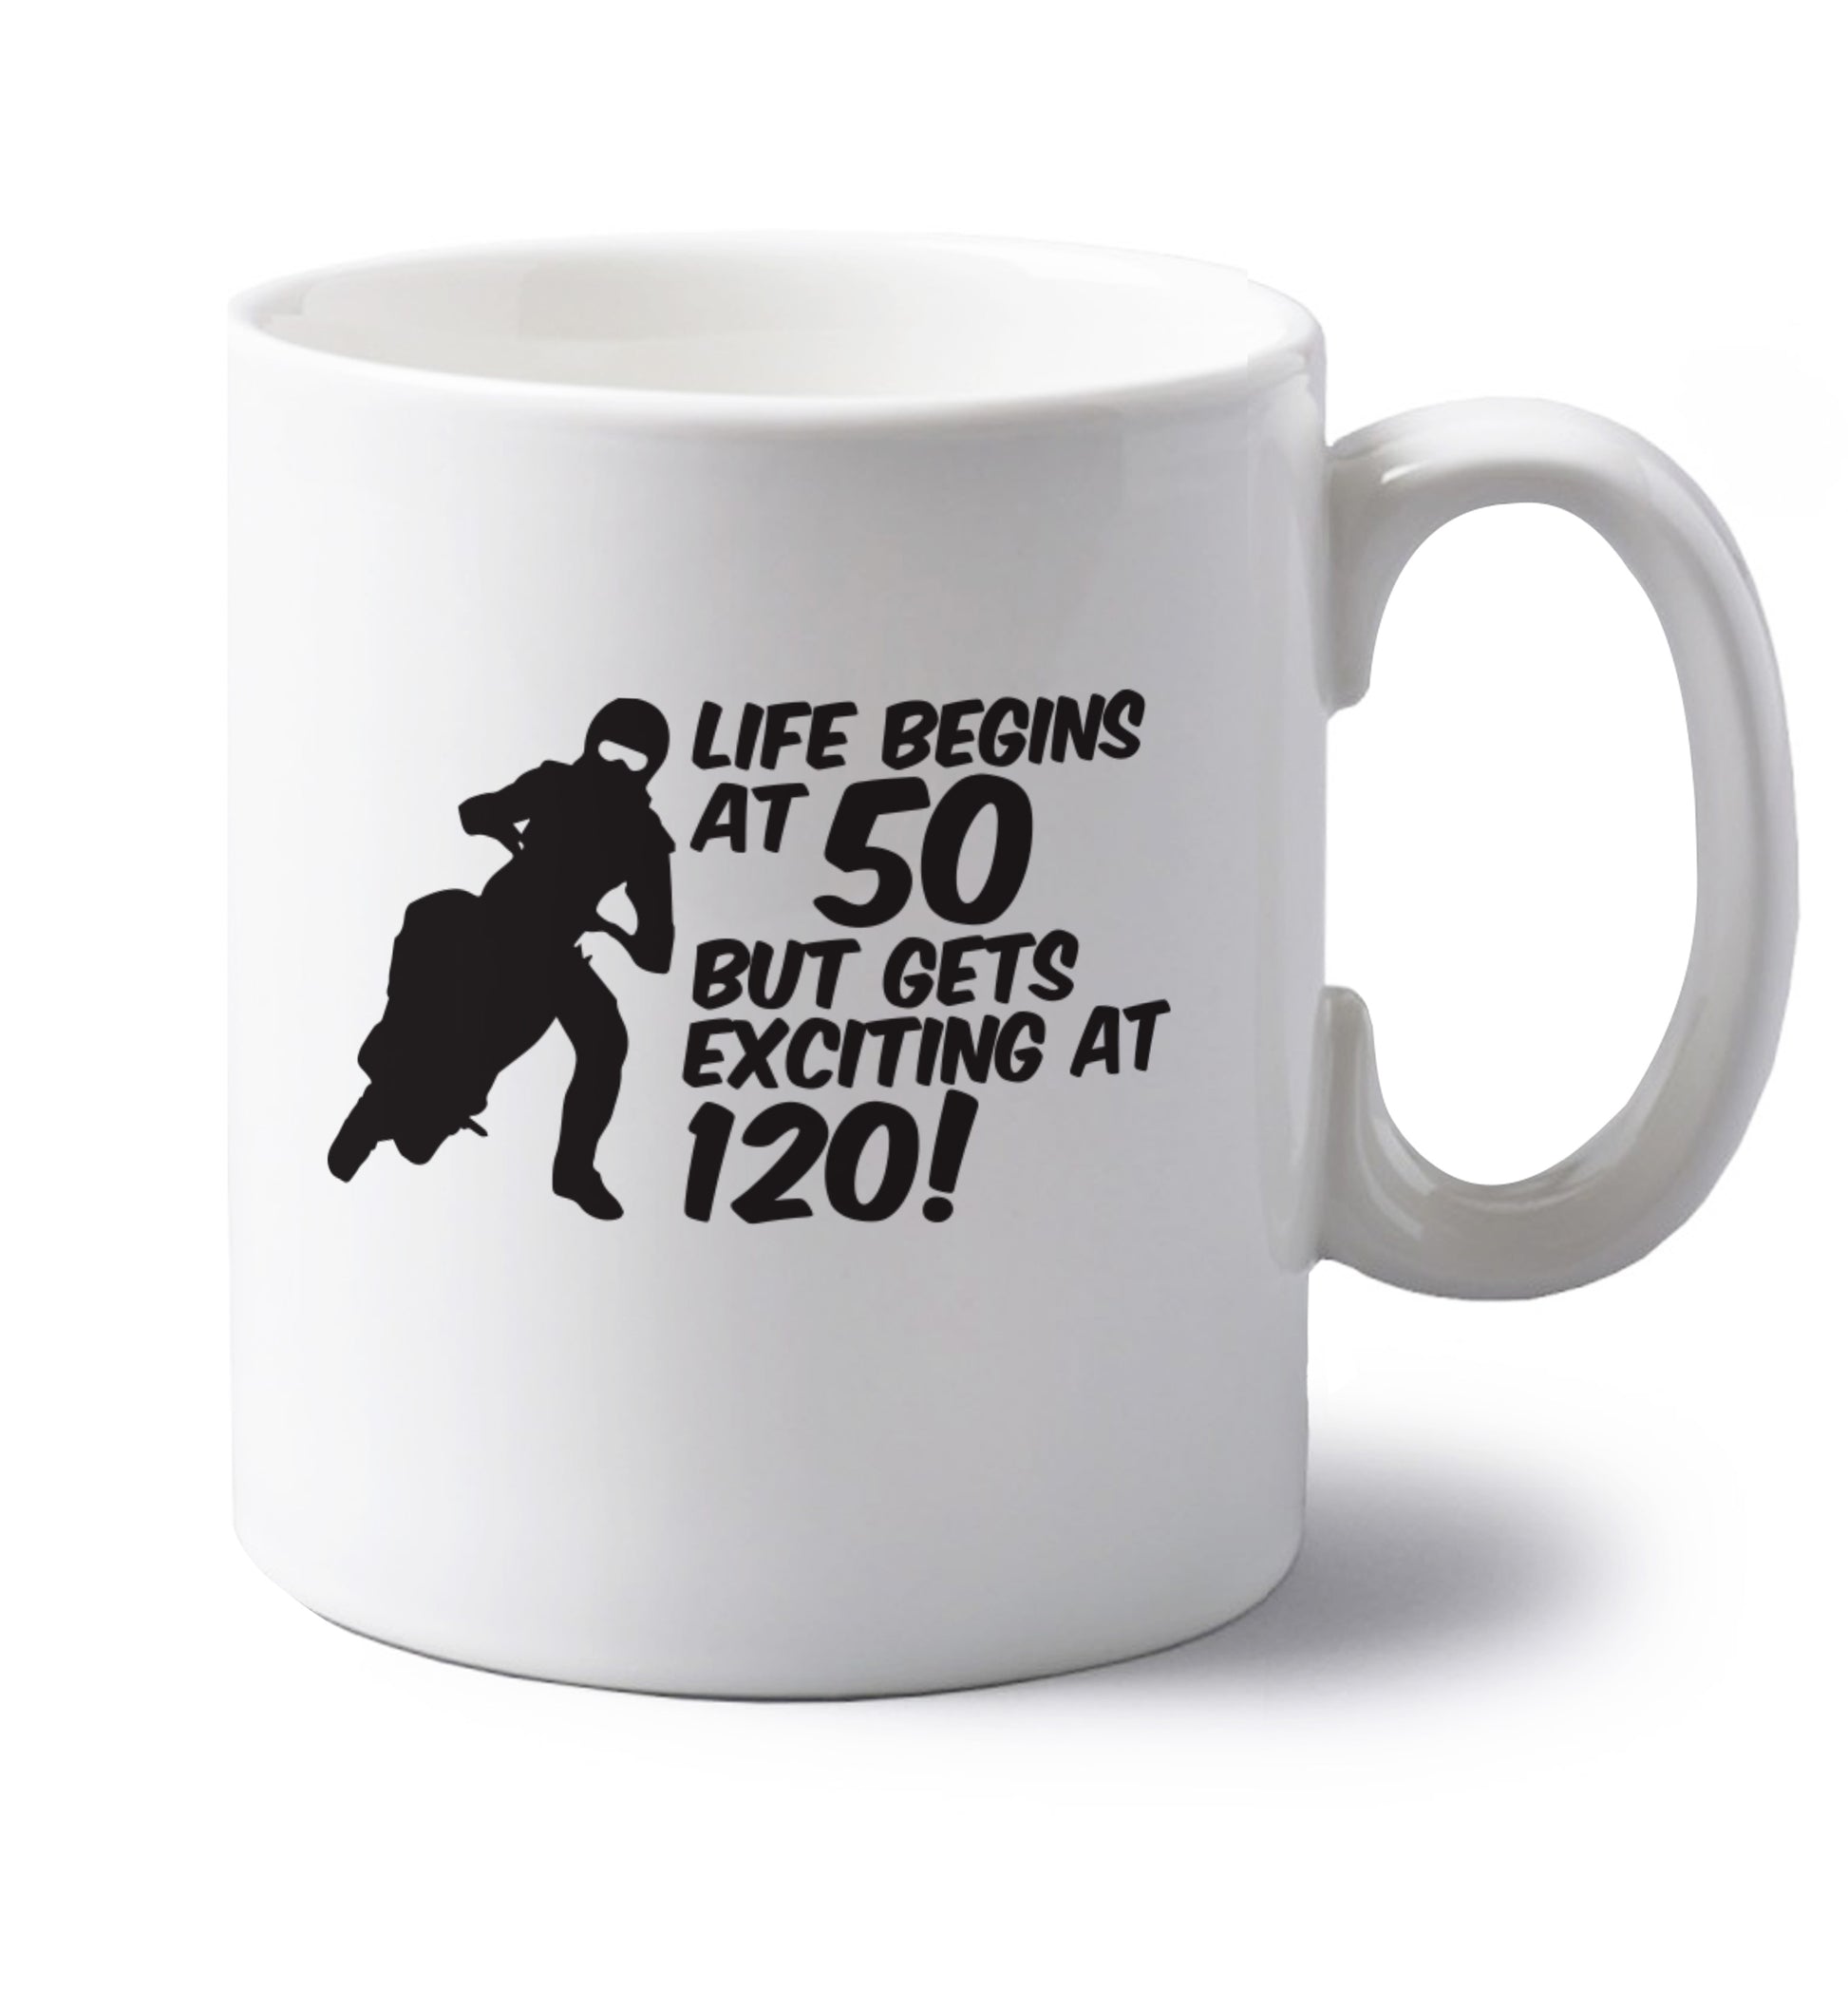 Life begins at 50 but it gets exciting at 120 left handed white ceramic mug 